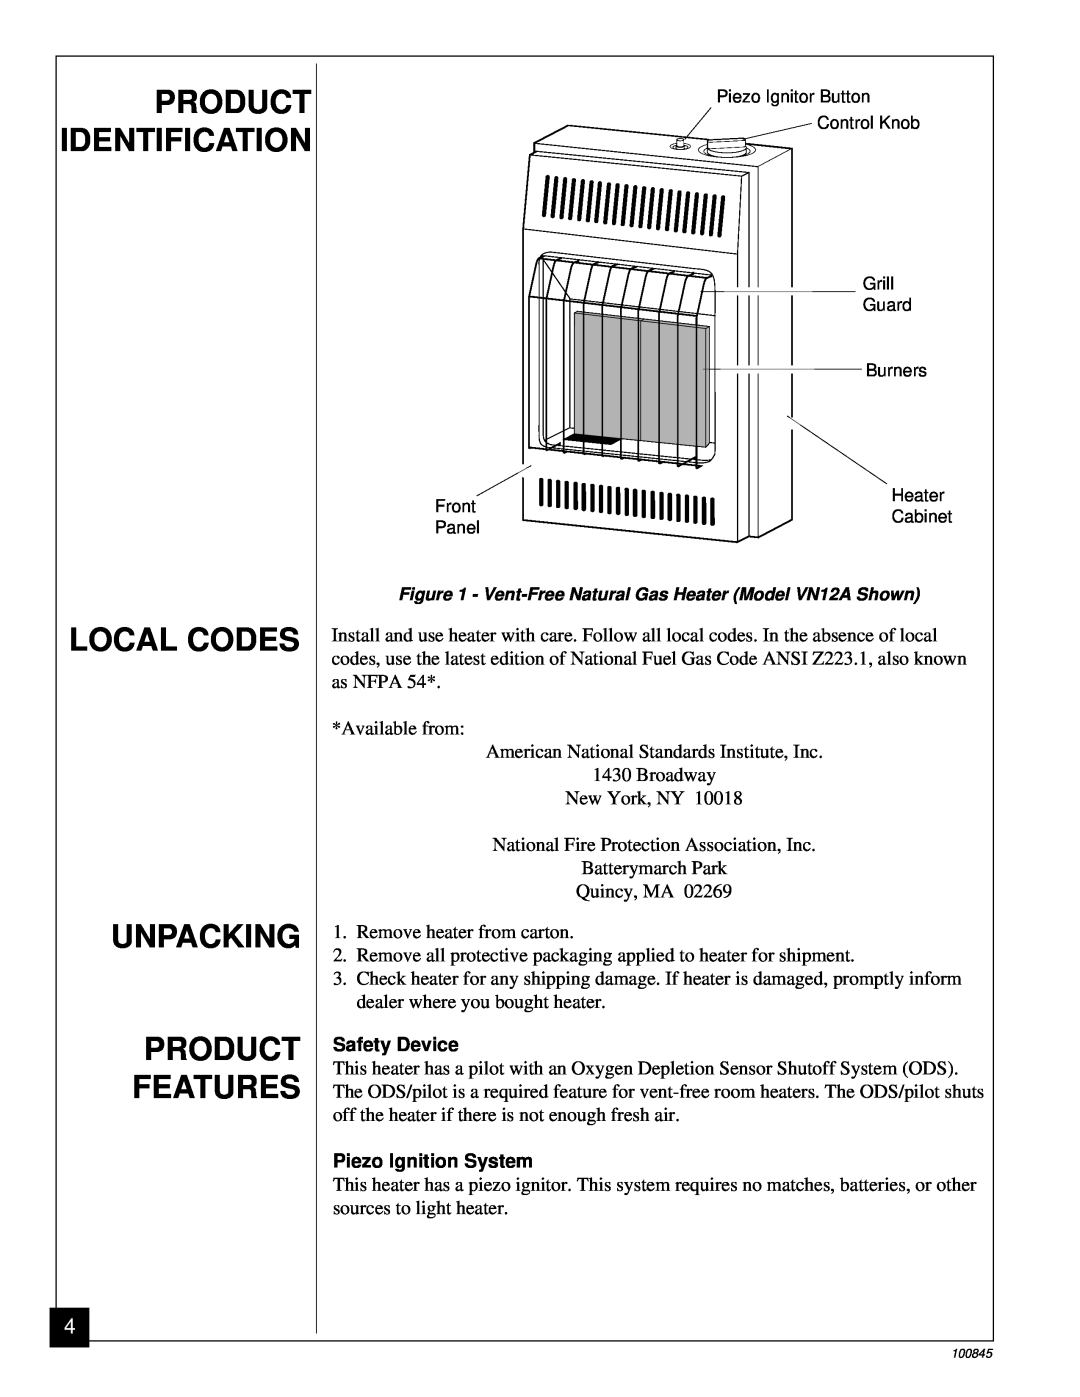 Vanguard Heating VN12A, VN6B Product Identification, Local Codes Unpacking Product Features, Safety Device 